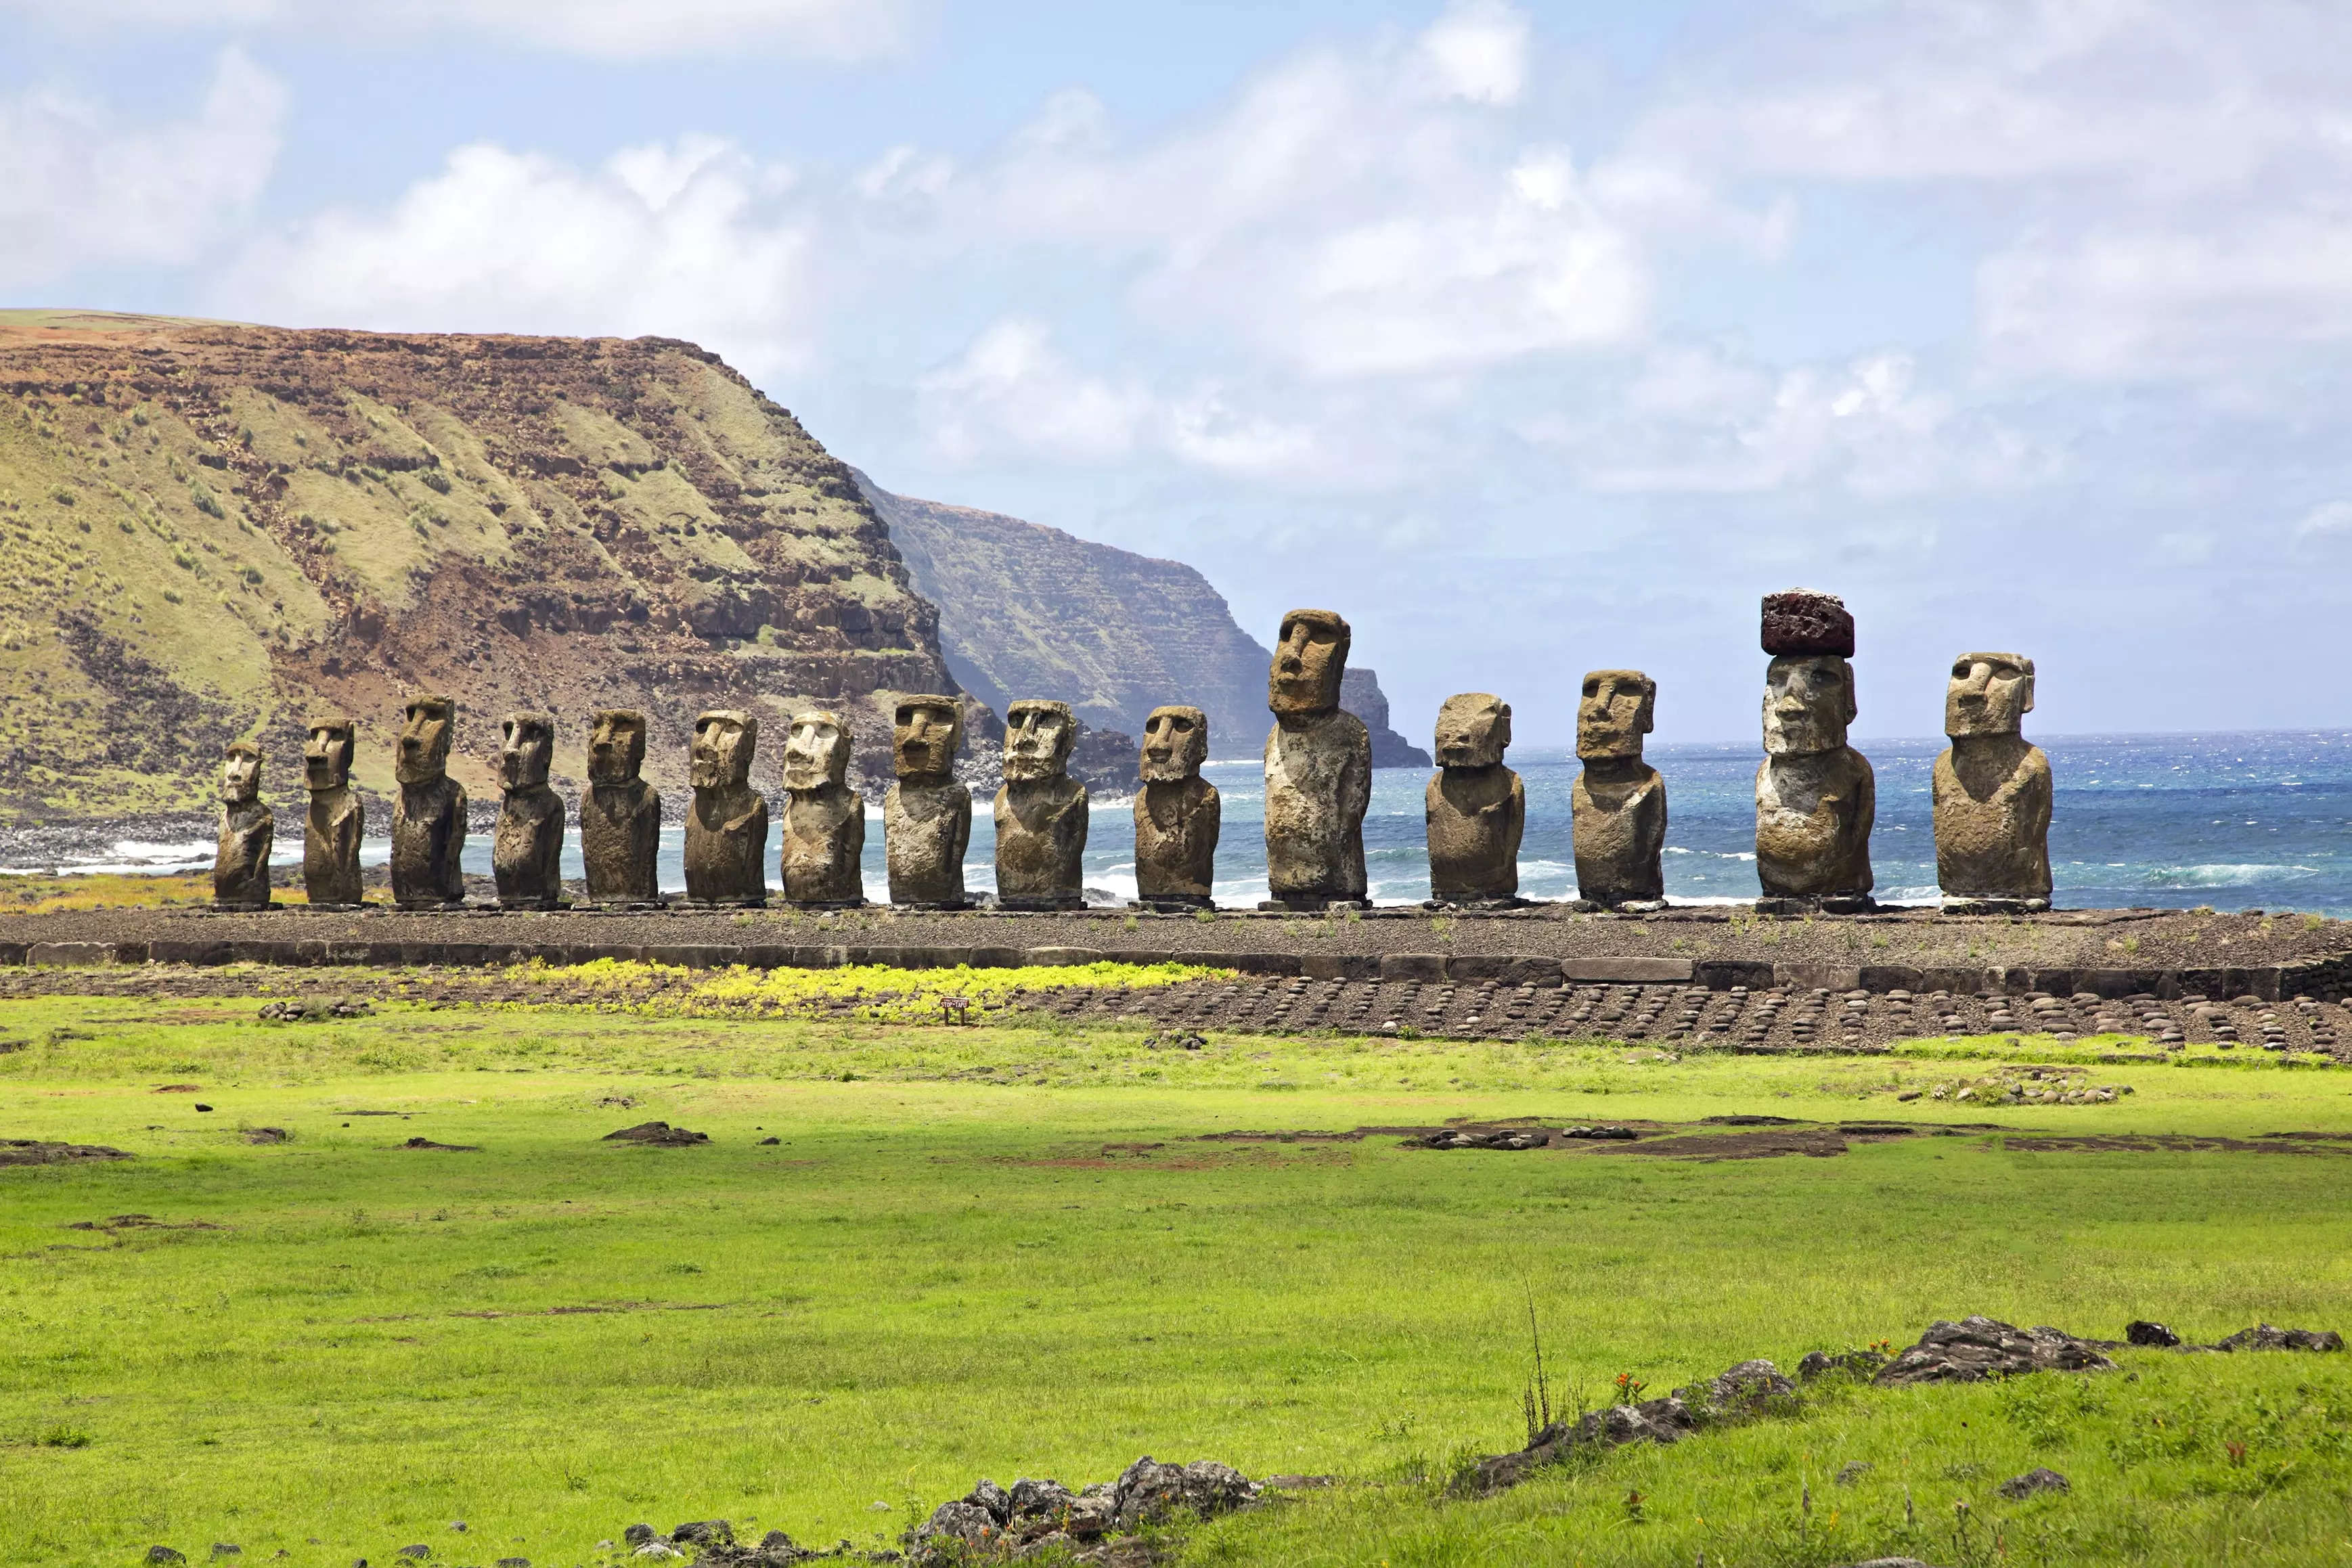 Tourism: Chile's Easter Island opens its doors for tourists after pandemic shutdown, ET TravelWorld